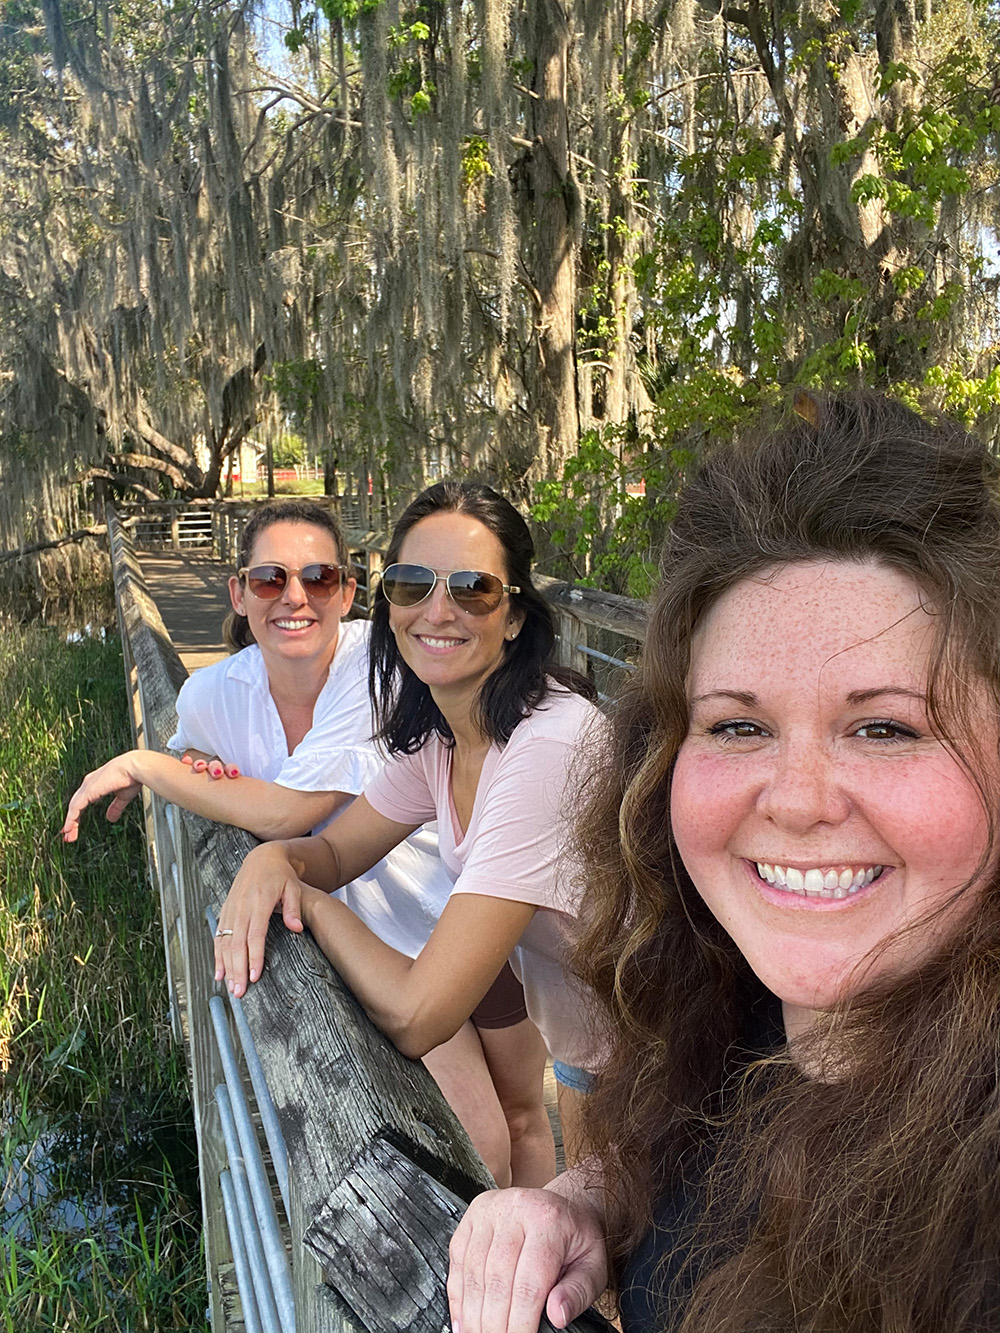 Travel Tips for A Visit to Inverness FL. A recap of where we stayed, fun outdoor activities to try, and delicious restaurants for a small-town girls' trip!